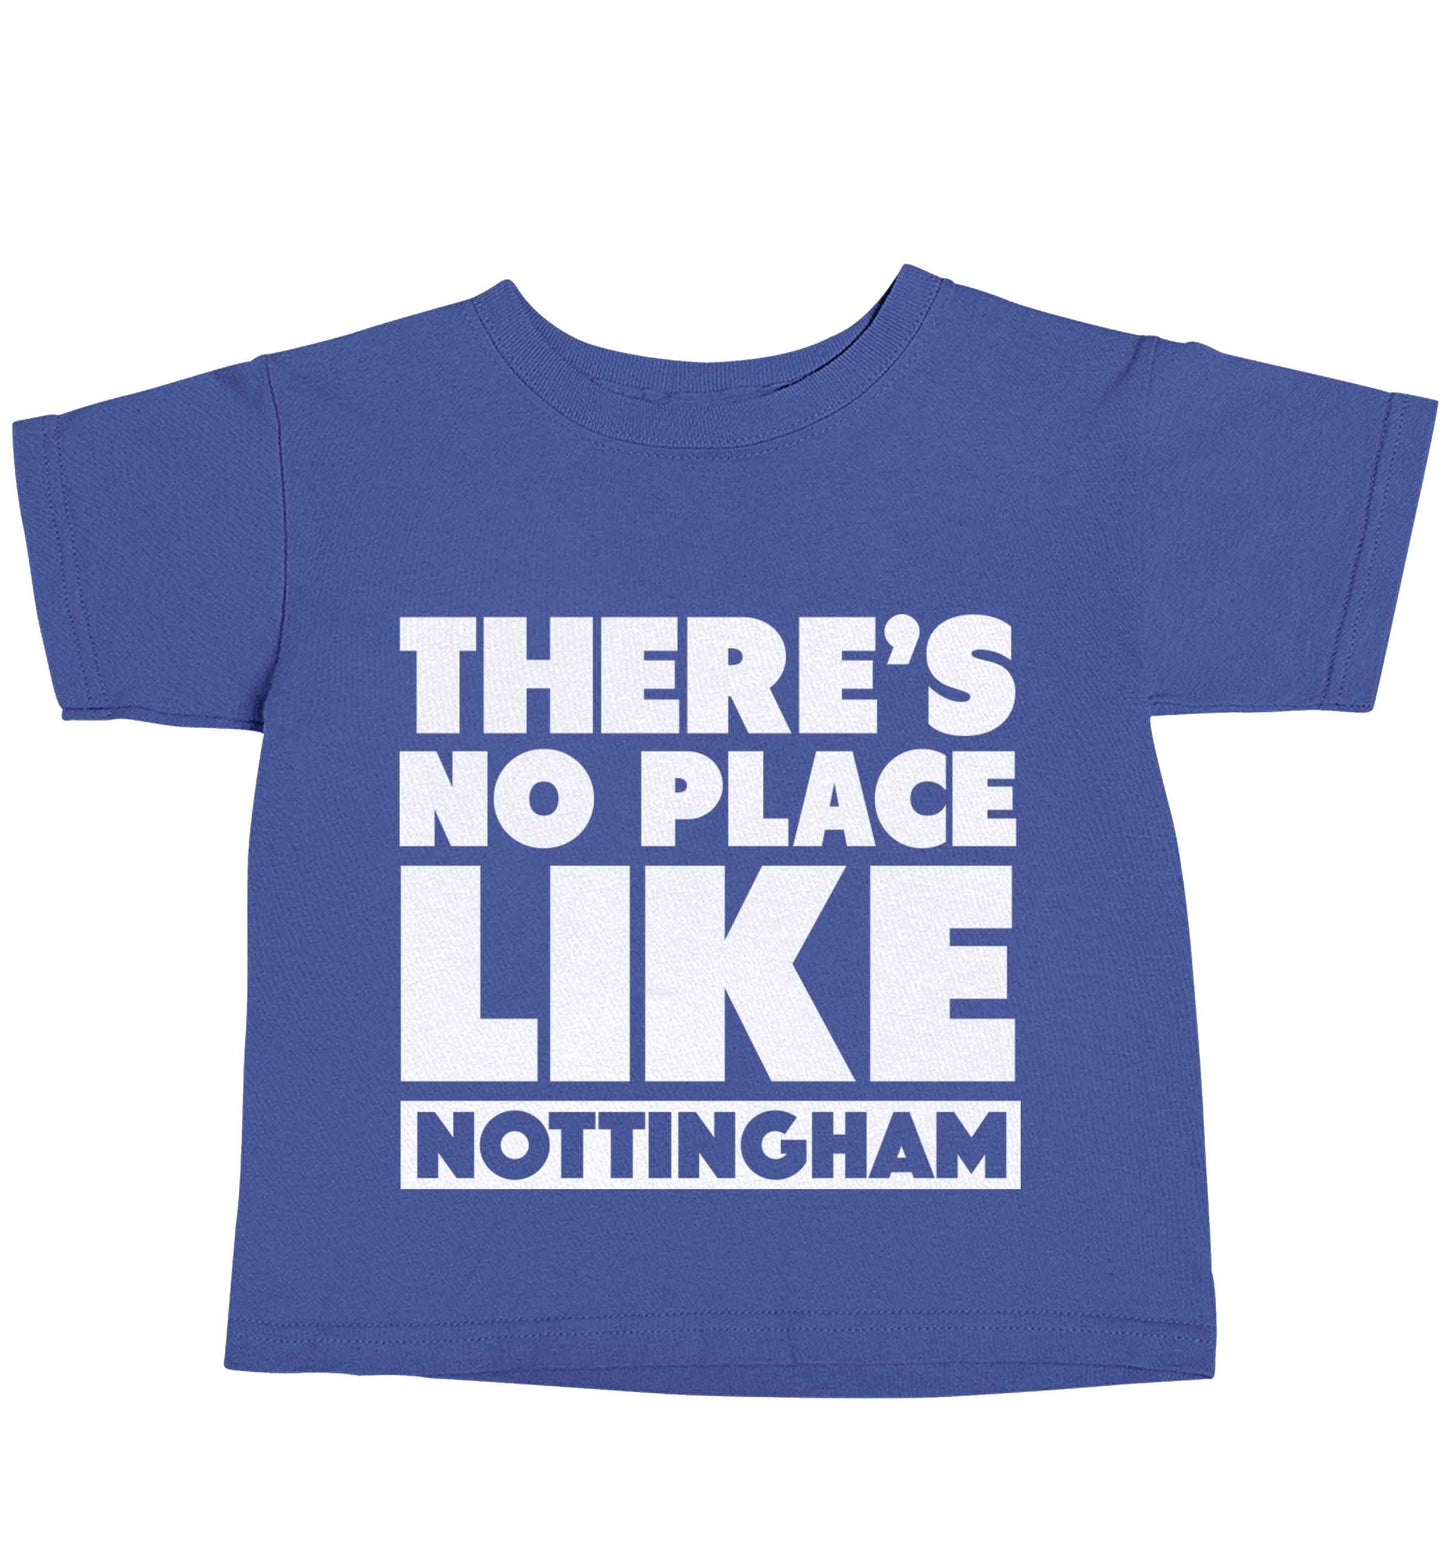 There's no place like Nottingham blue baby toddler Tshirt 2 Years